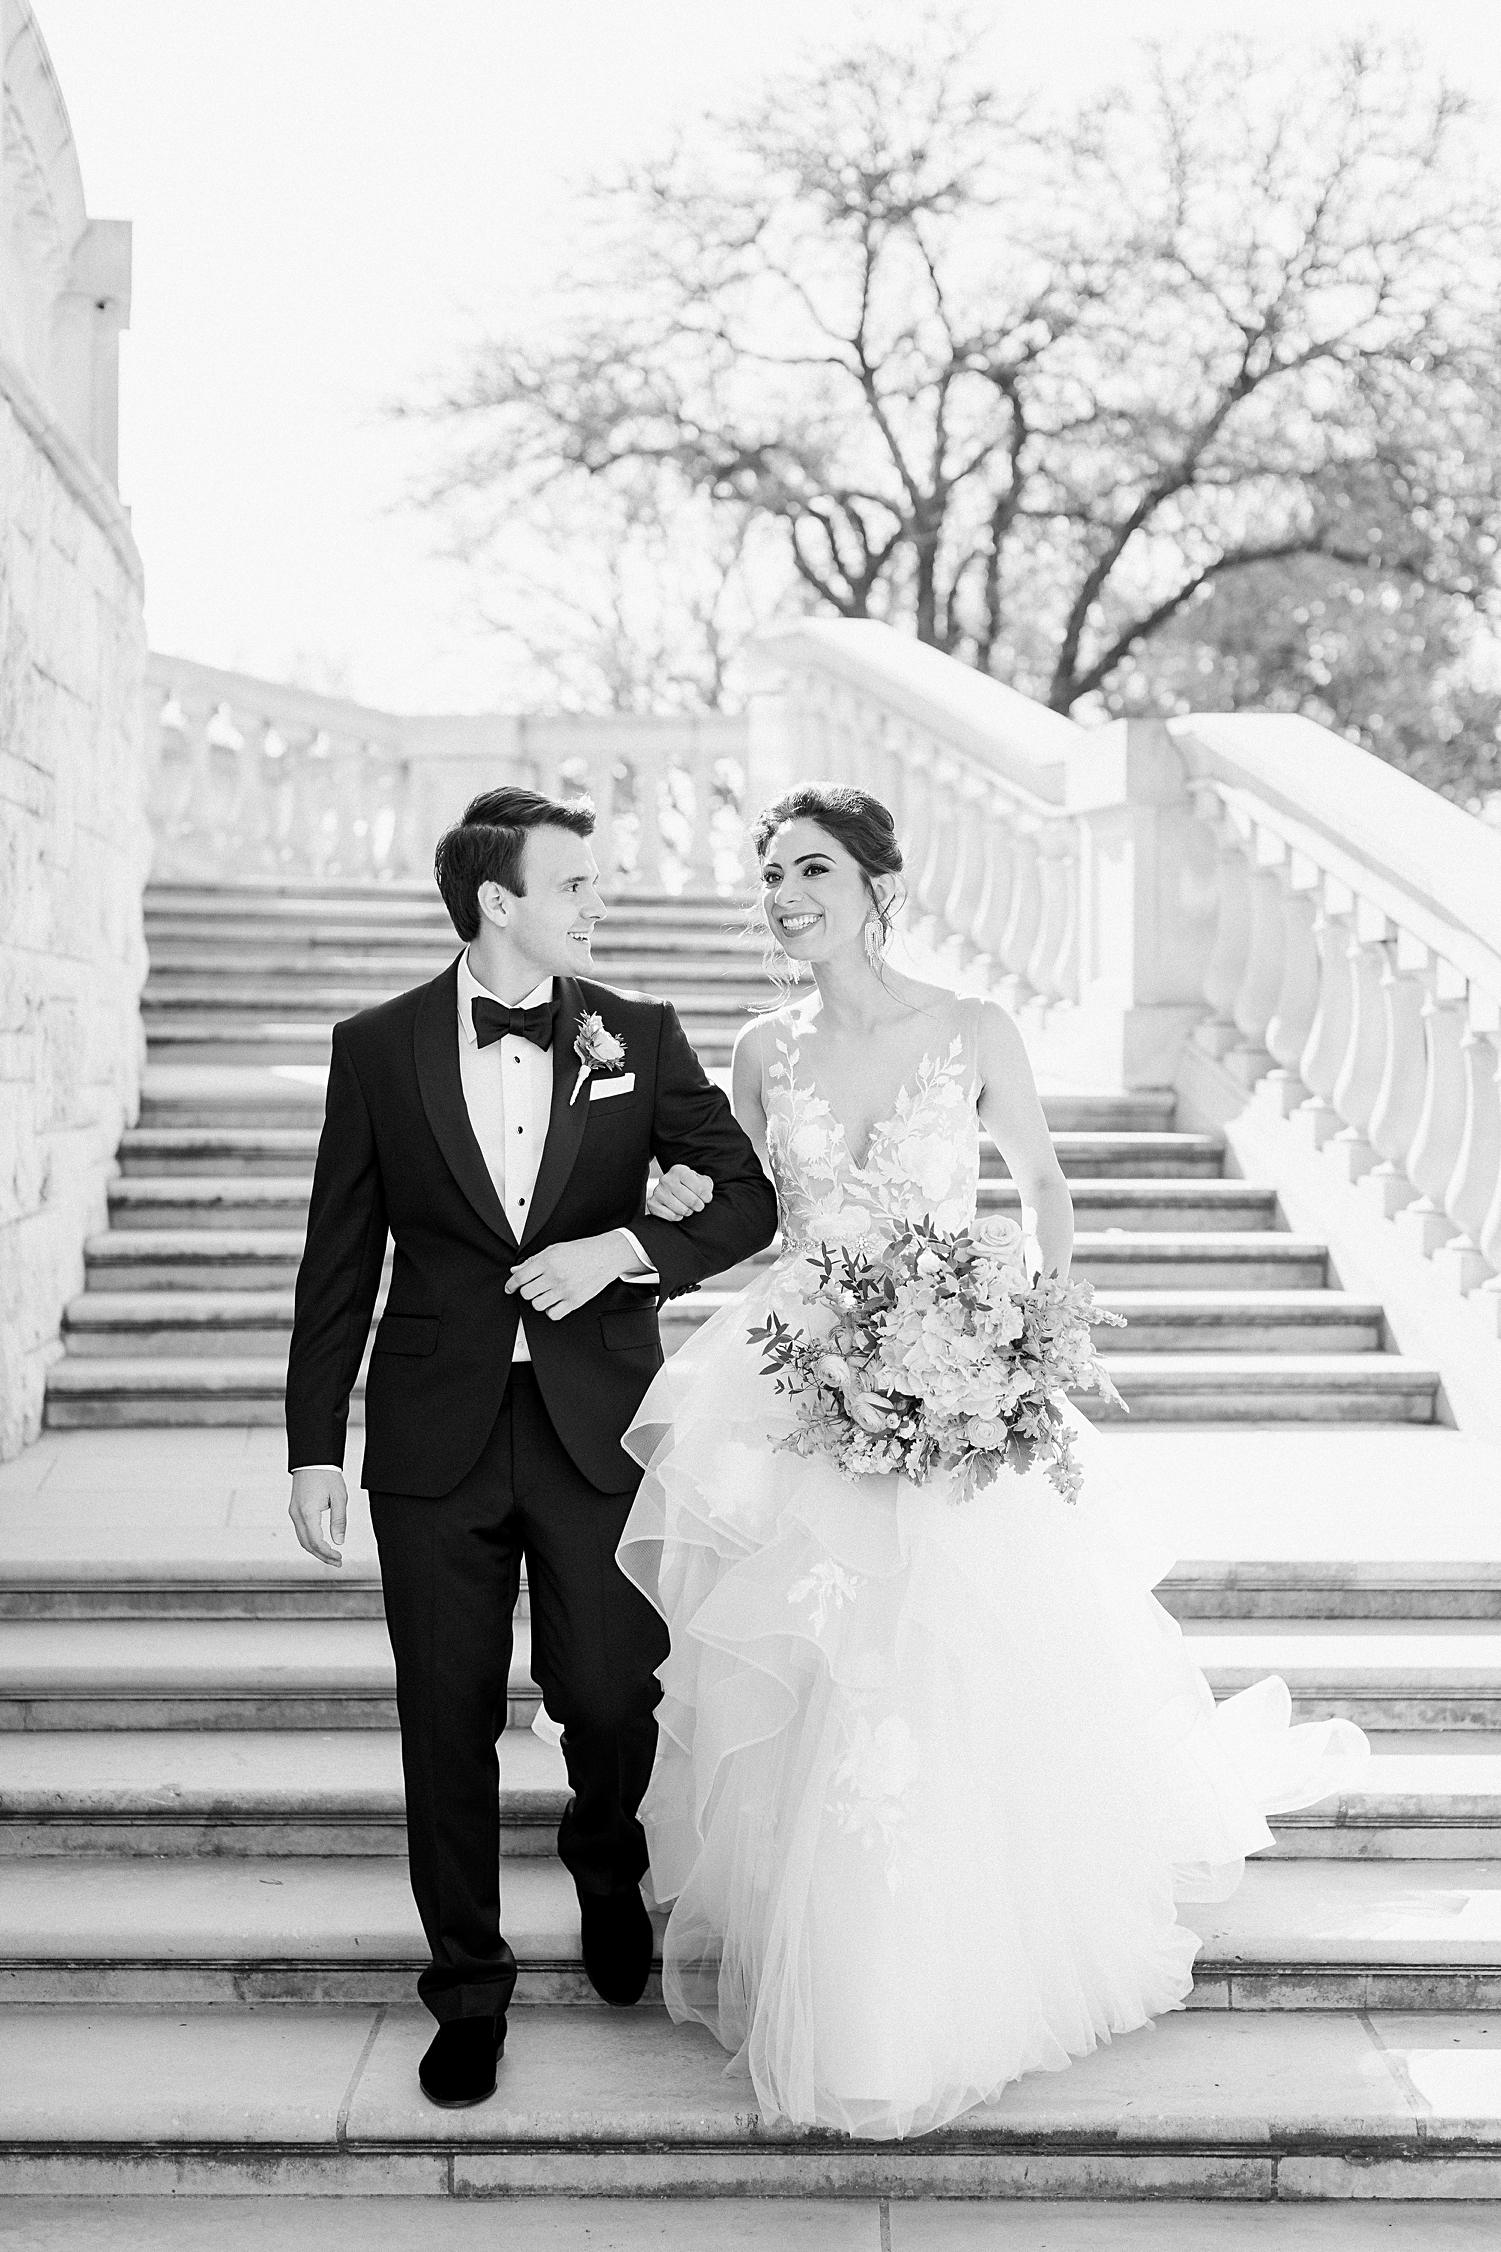 Bride and groom walking down outdoor staircase french estate wedding black and white